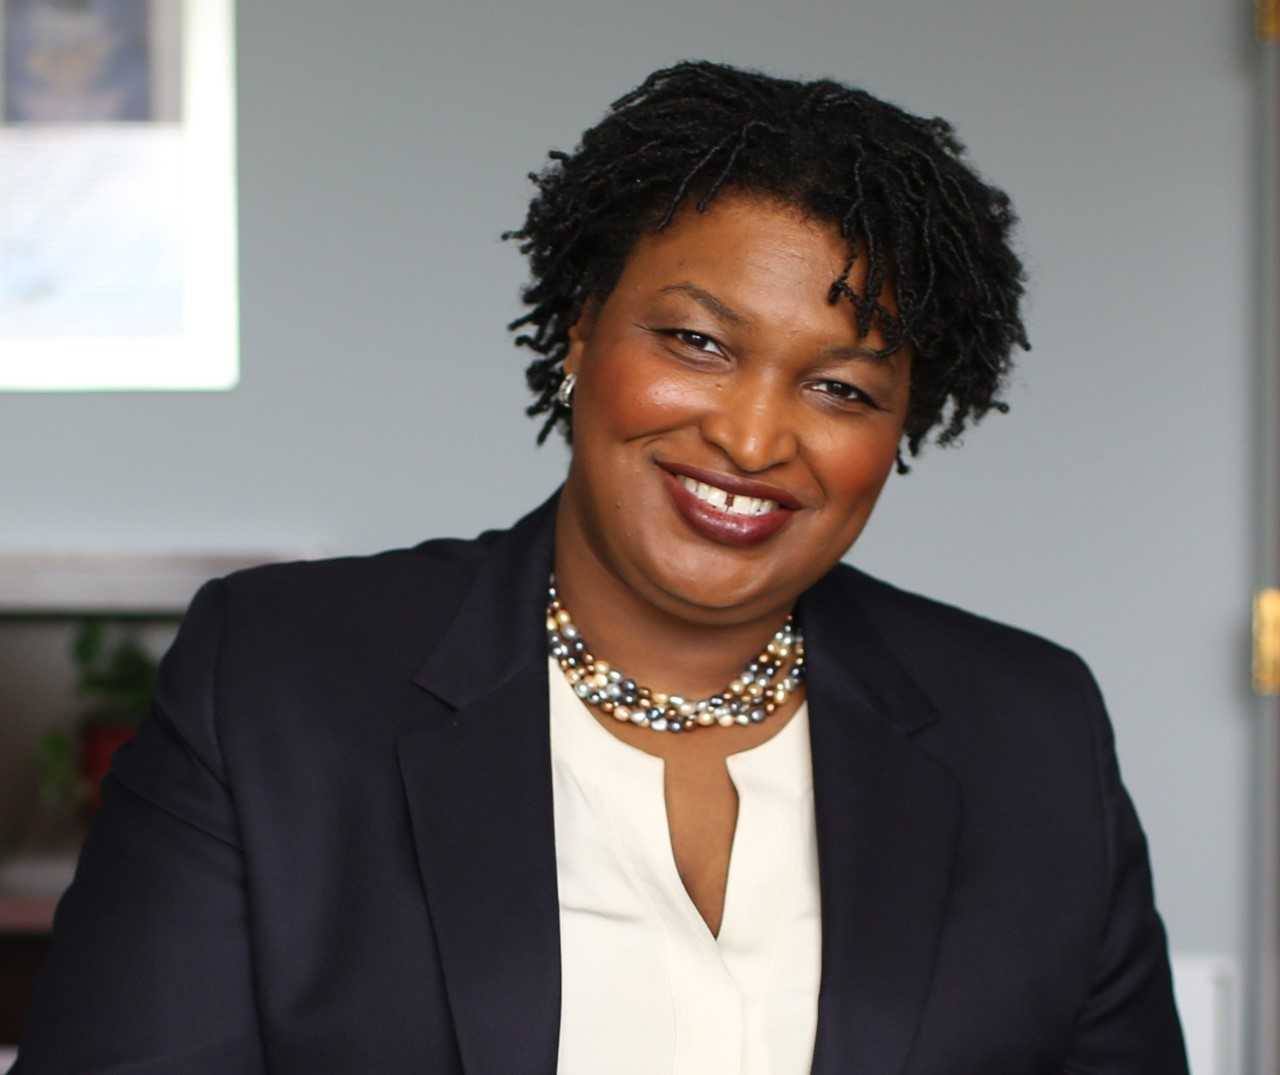 Why Stacey Abrams Lost the Governor’s Race